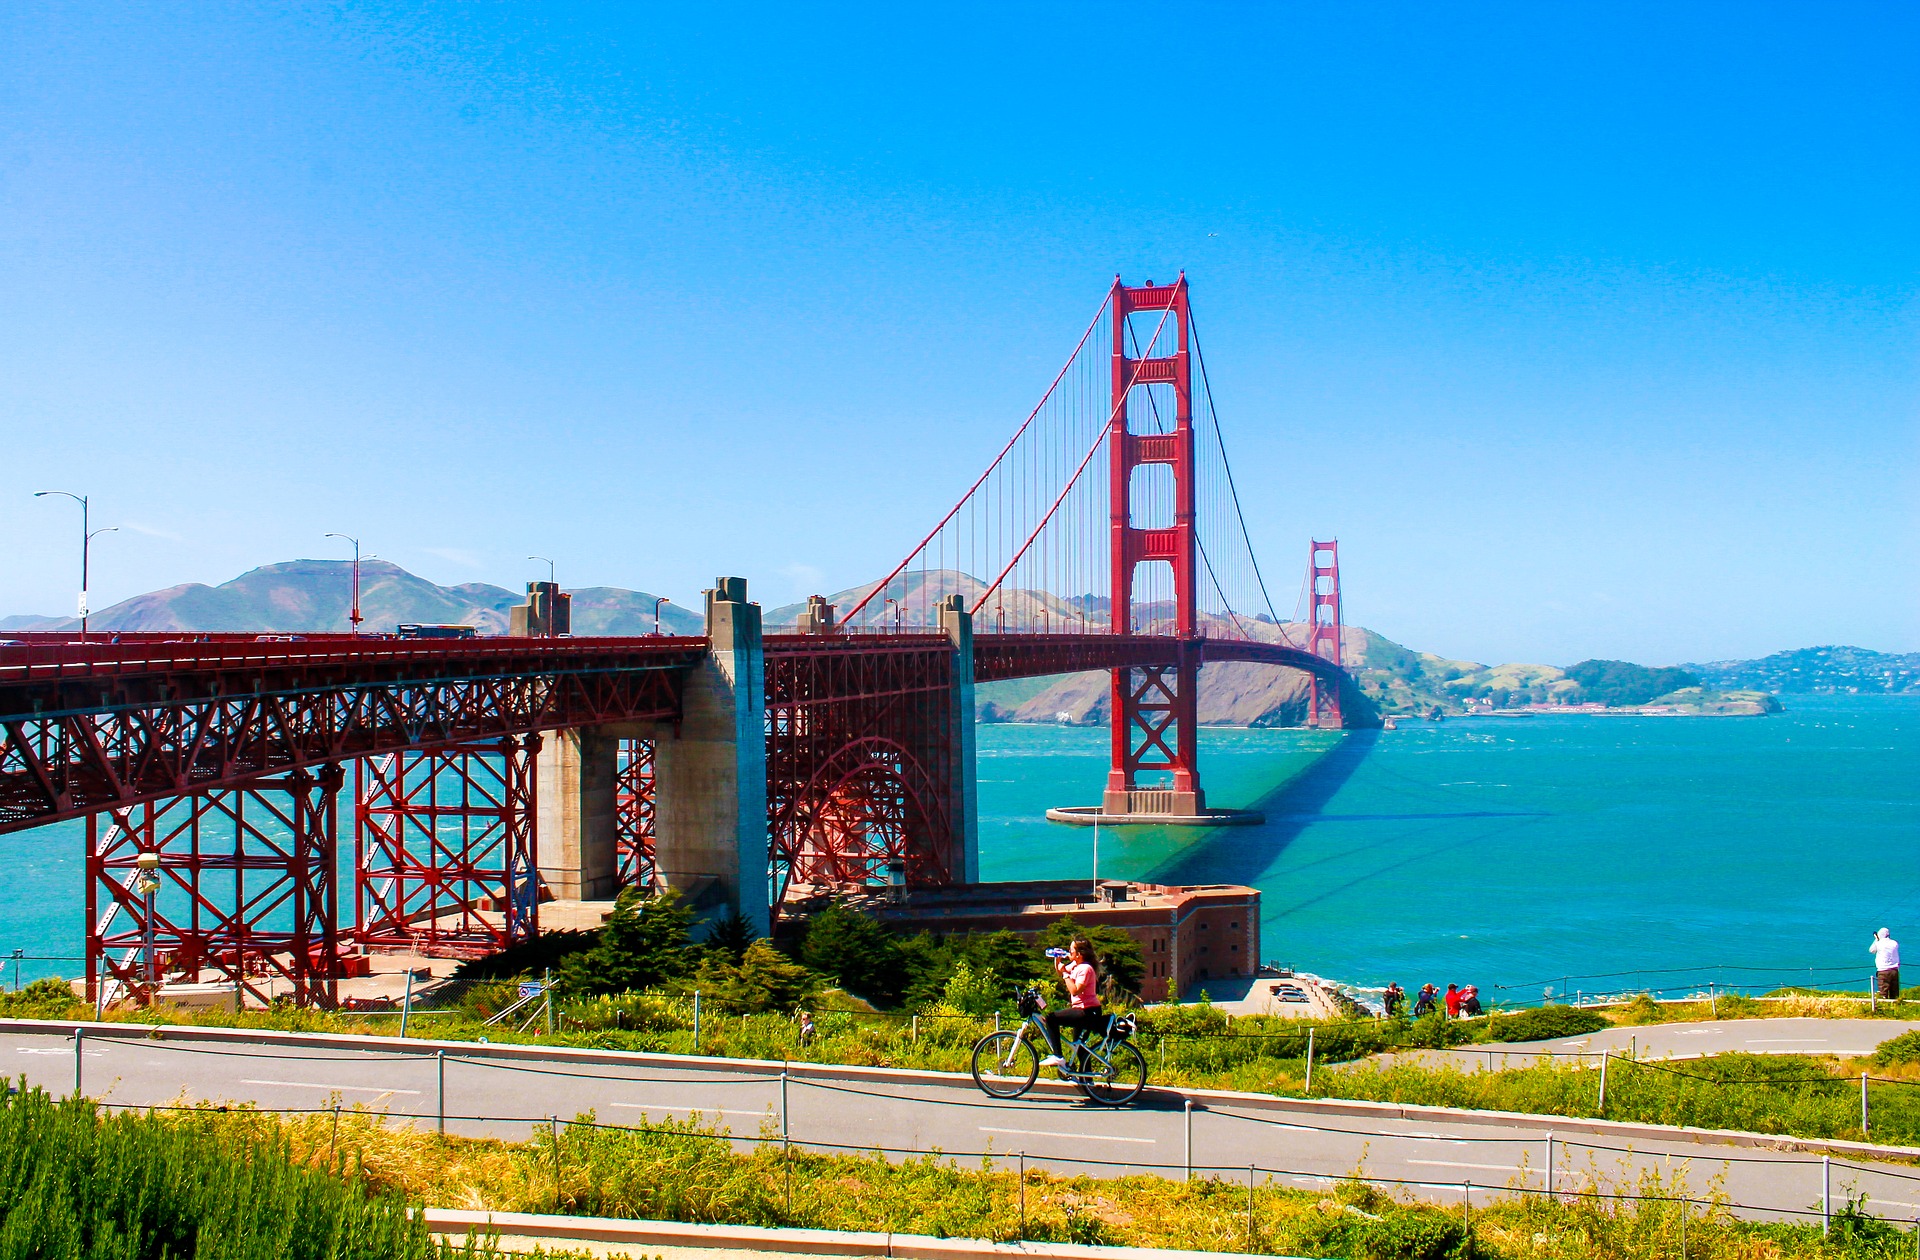 Top 15 Attractions And Things To Do In San Francisco, CA